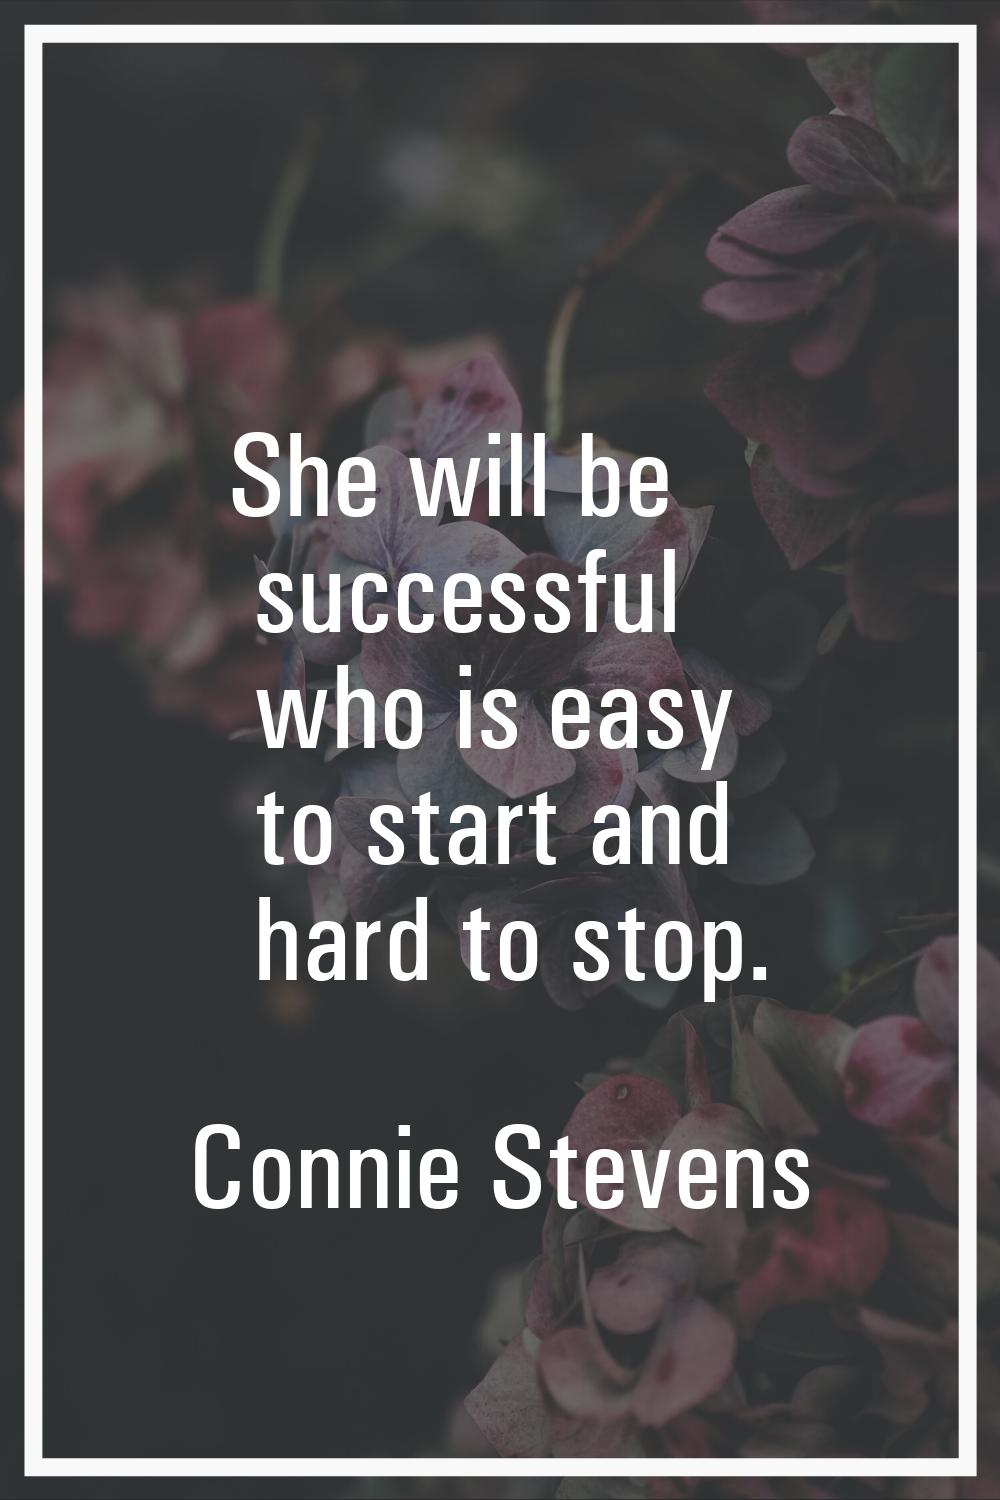 She will be successful who is easy to start and hard to stop.